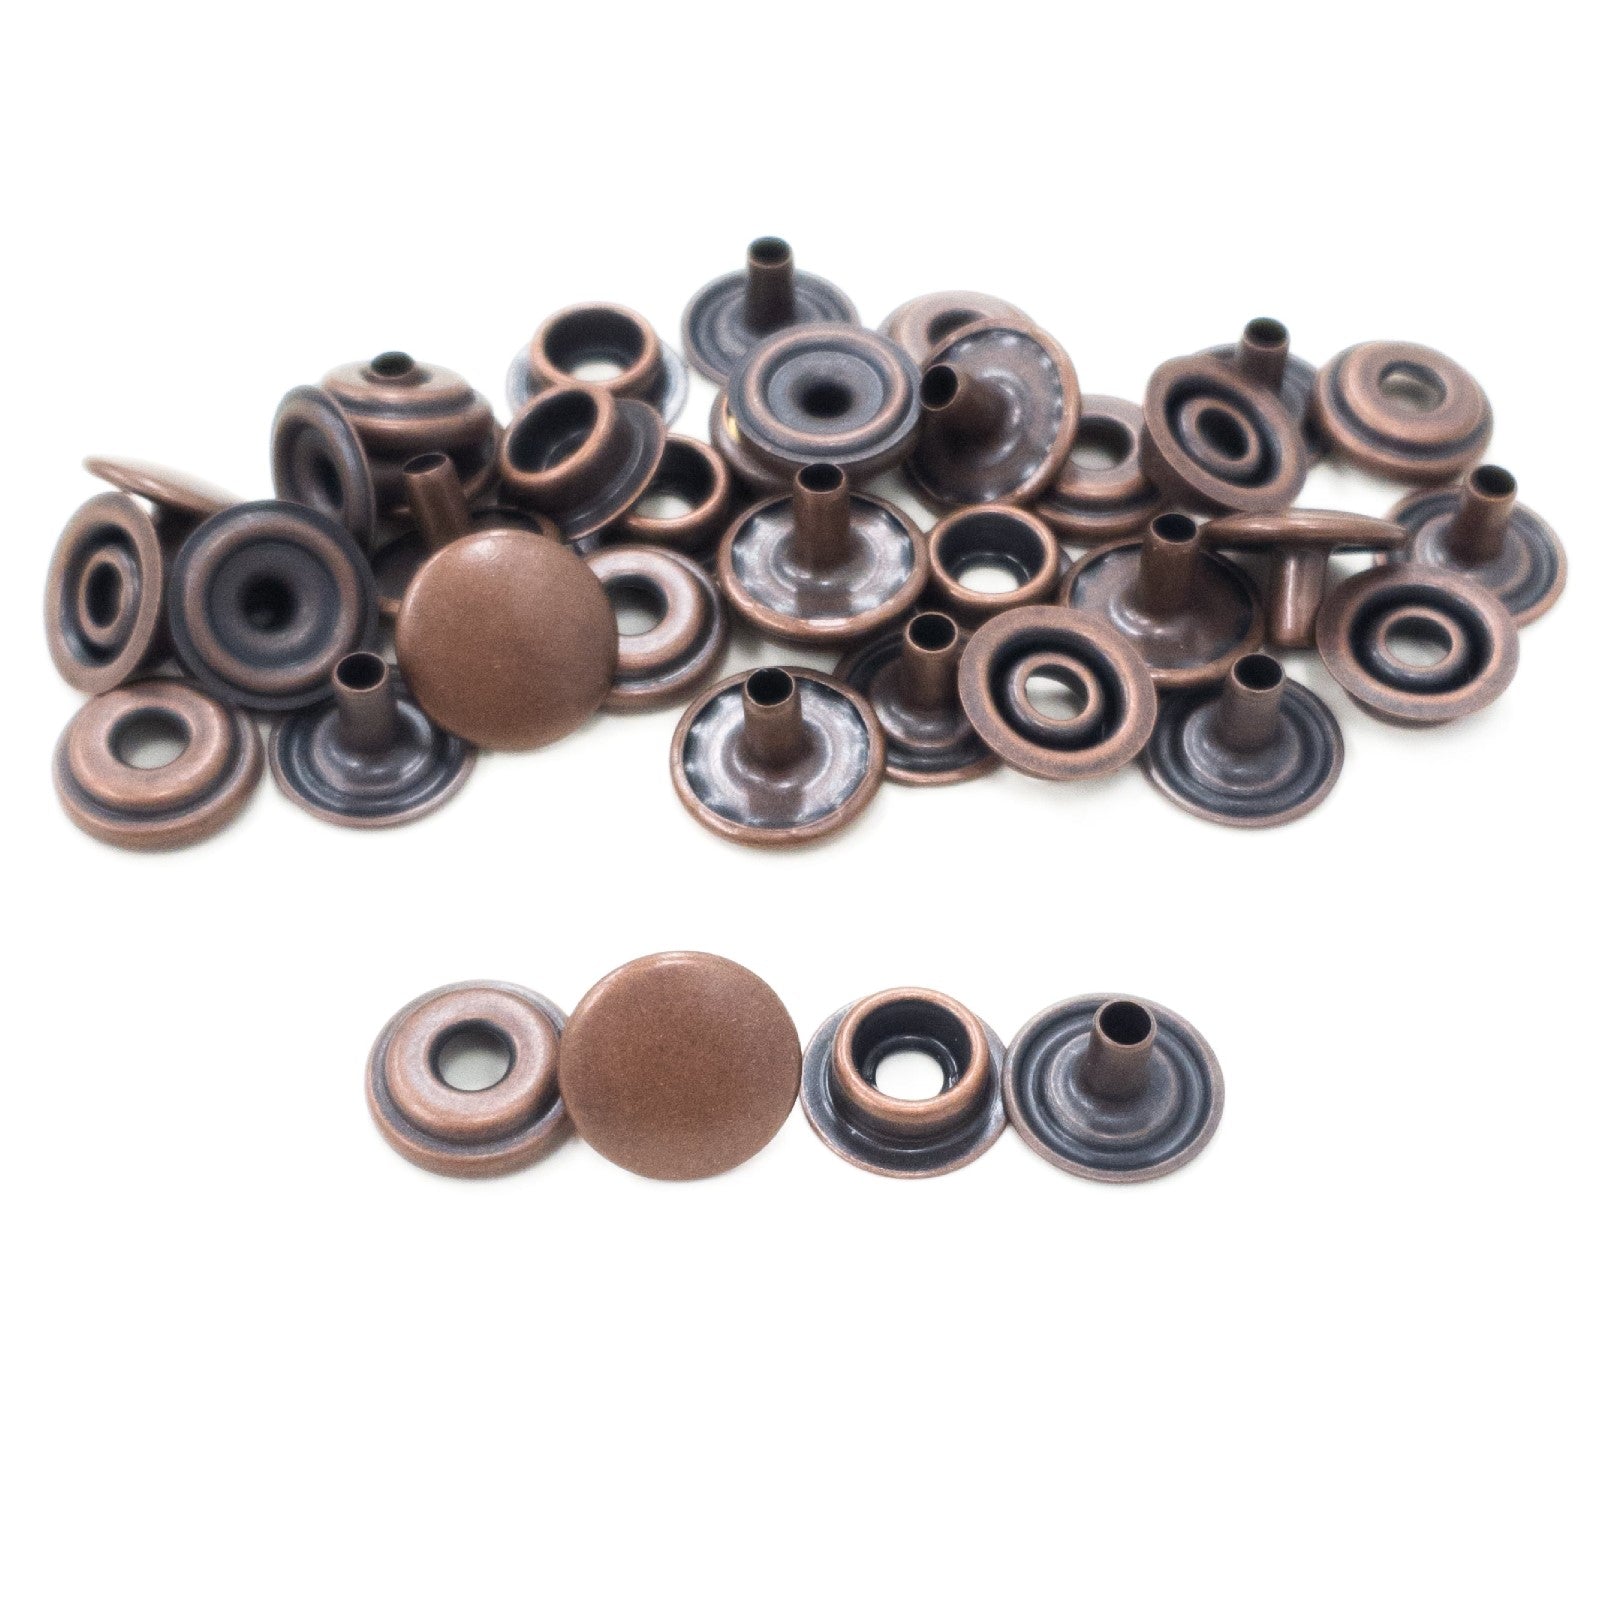 Inton 70 Sets Metal Line 24 15mm 5/8' Metal Snap Fastener Leather Rapid Rivet Button Sewing with Punch Set Tool (15mm Bronze)